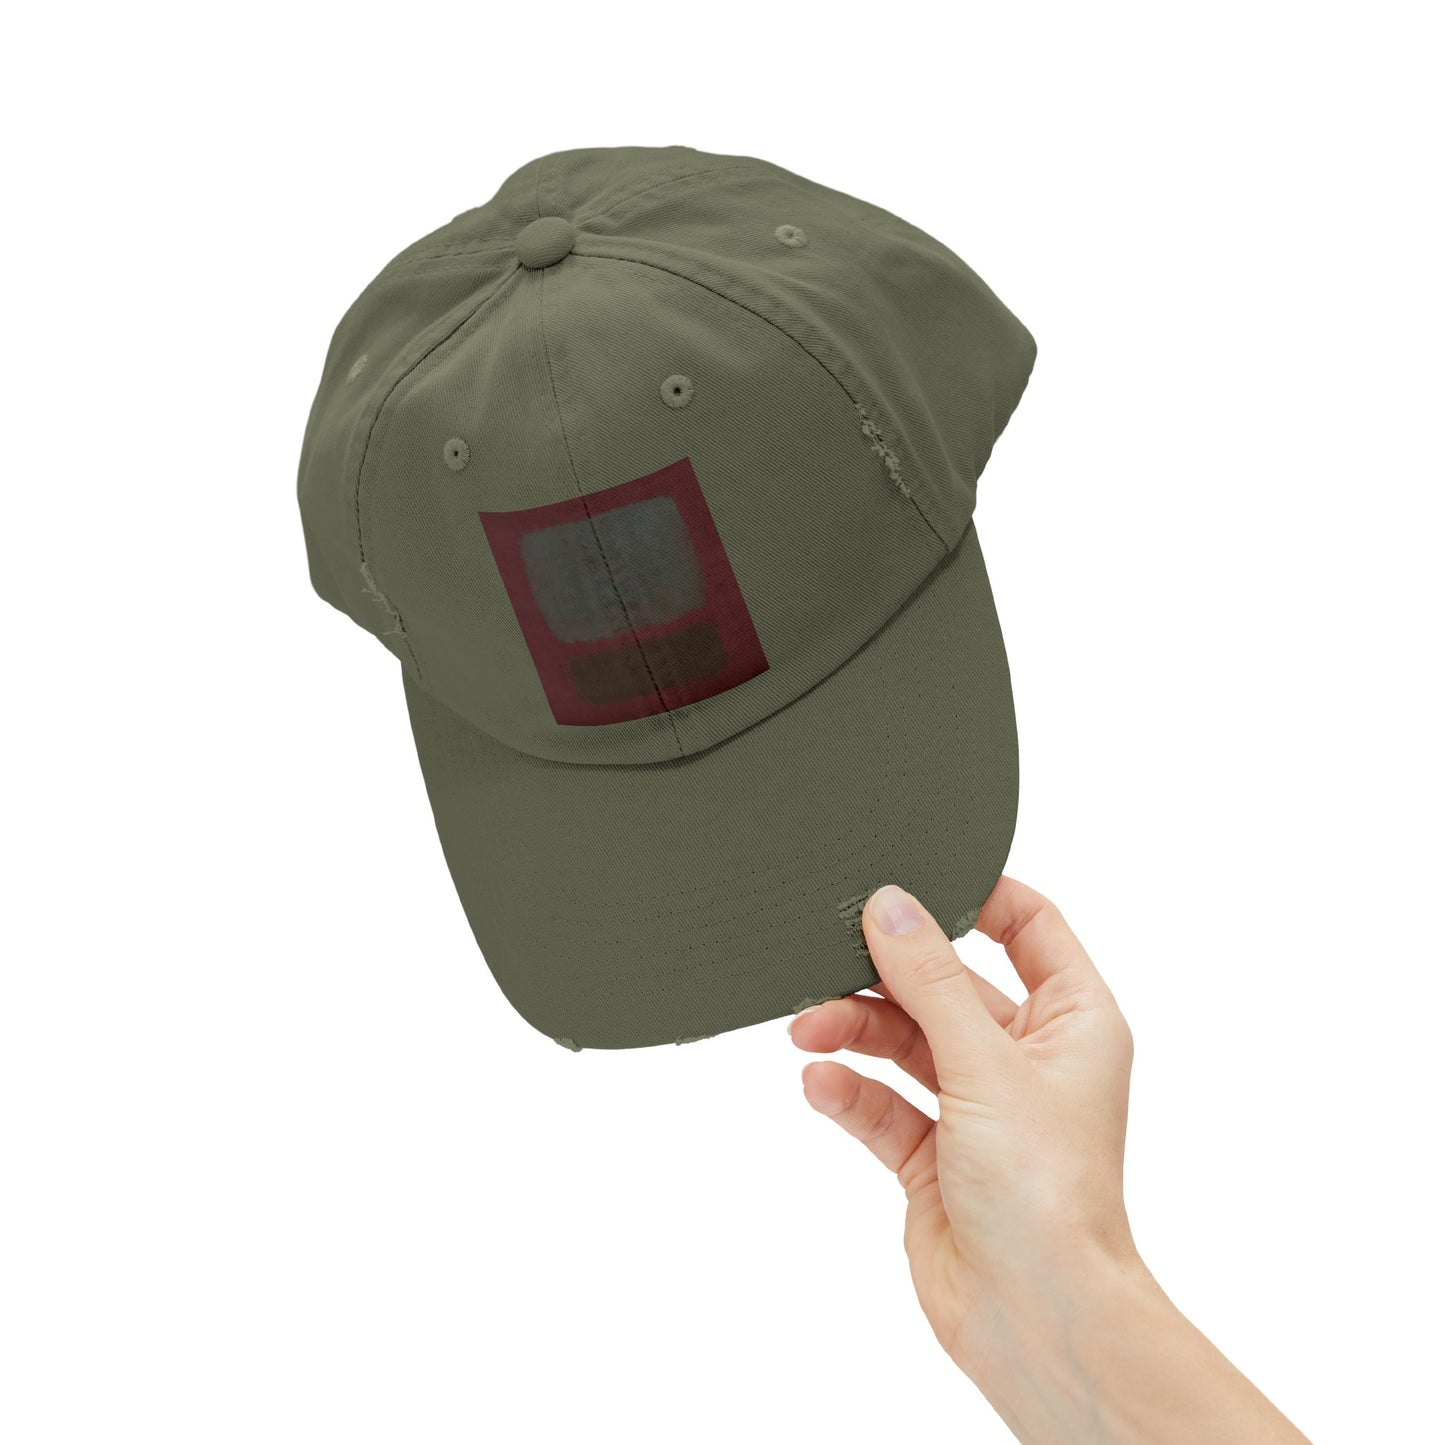 a hand holding a green hat with a red square on it